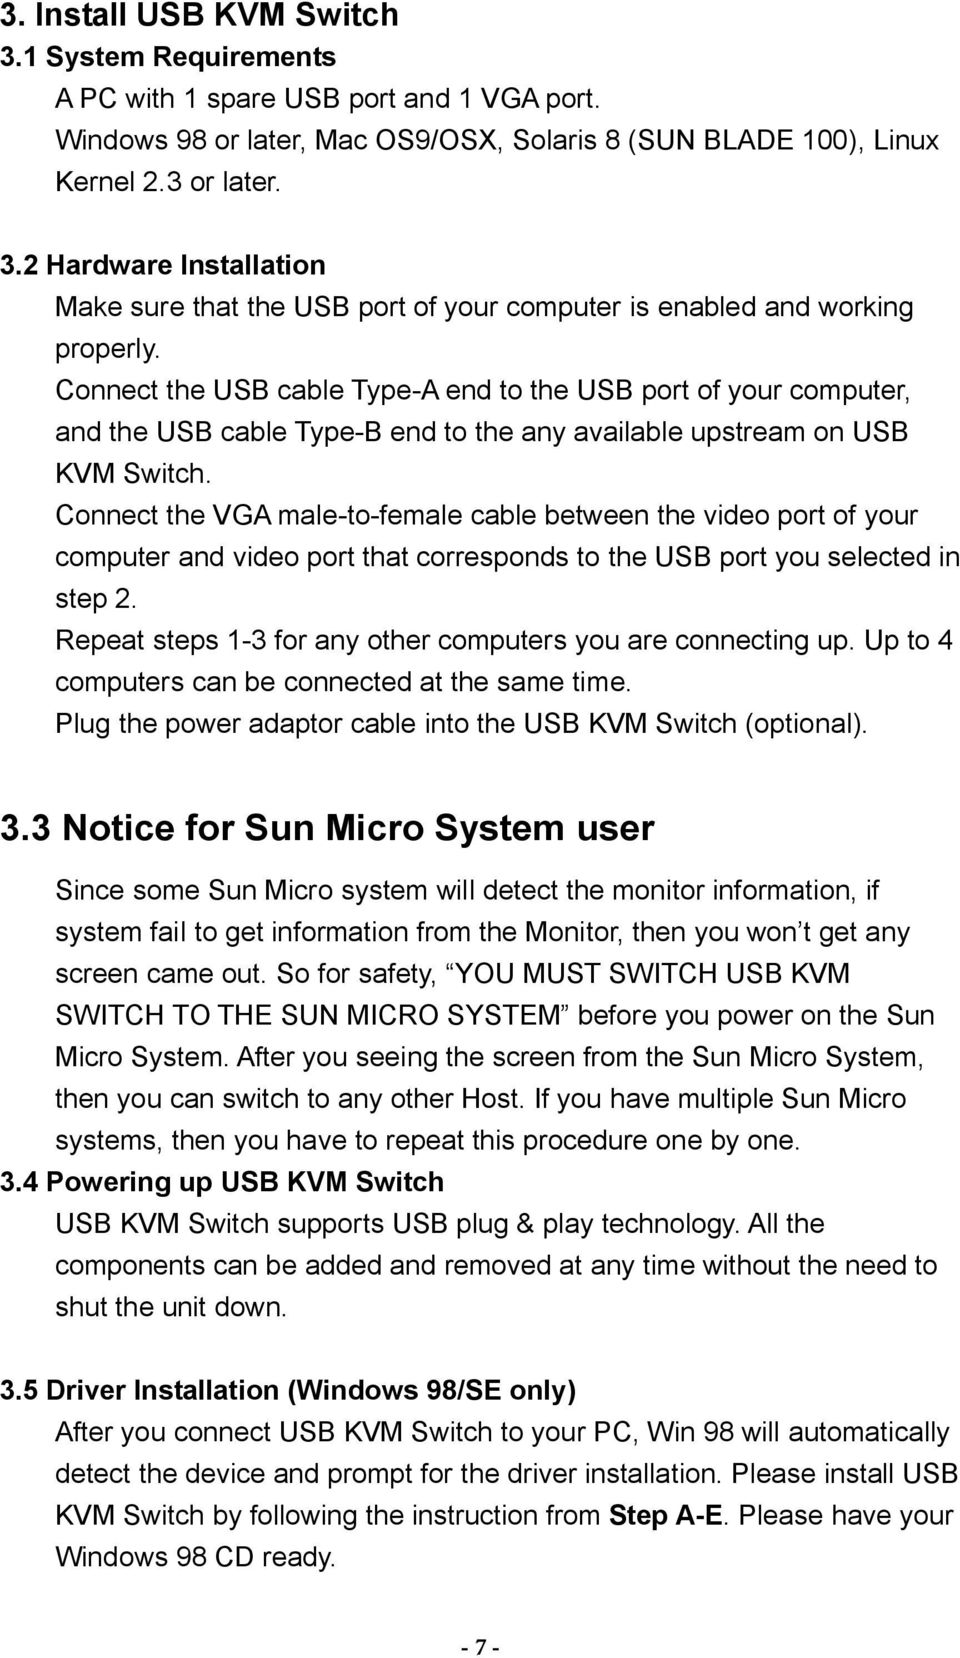 Connect the VGA male-to-female cable between the video port of your computer and video port that corresponds to the USB port you selected in step 2.